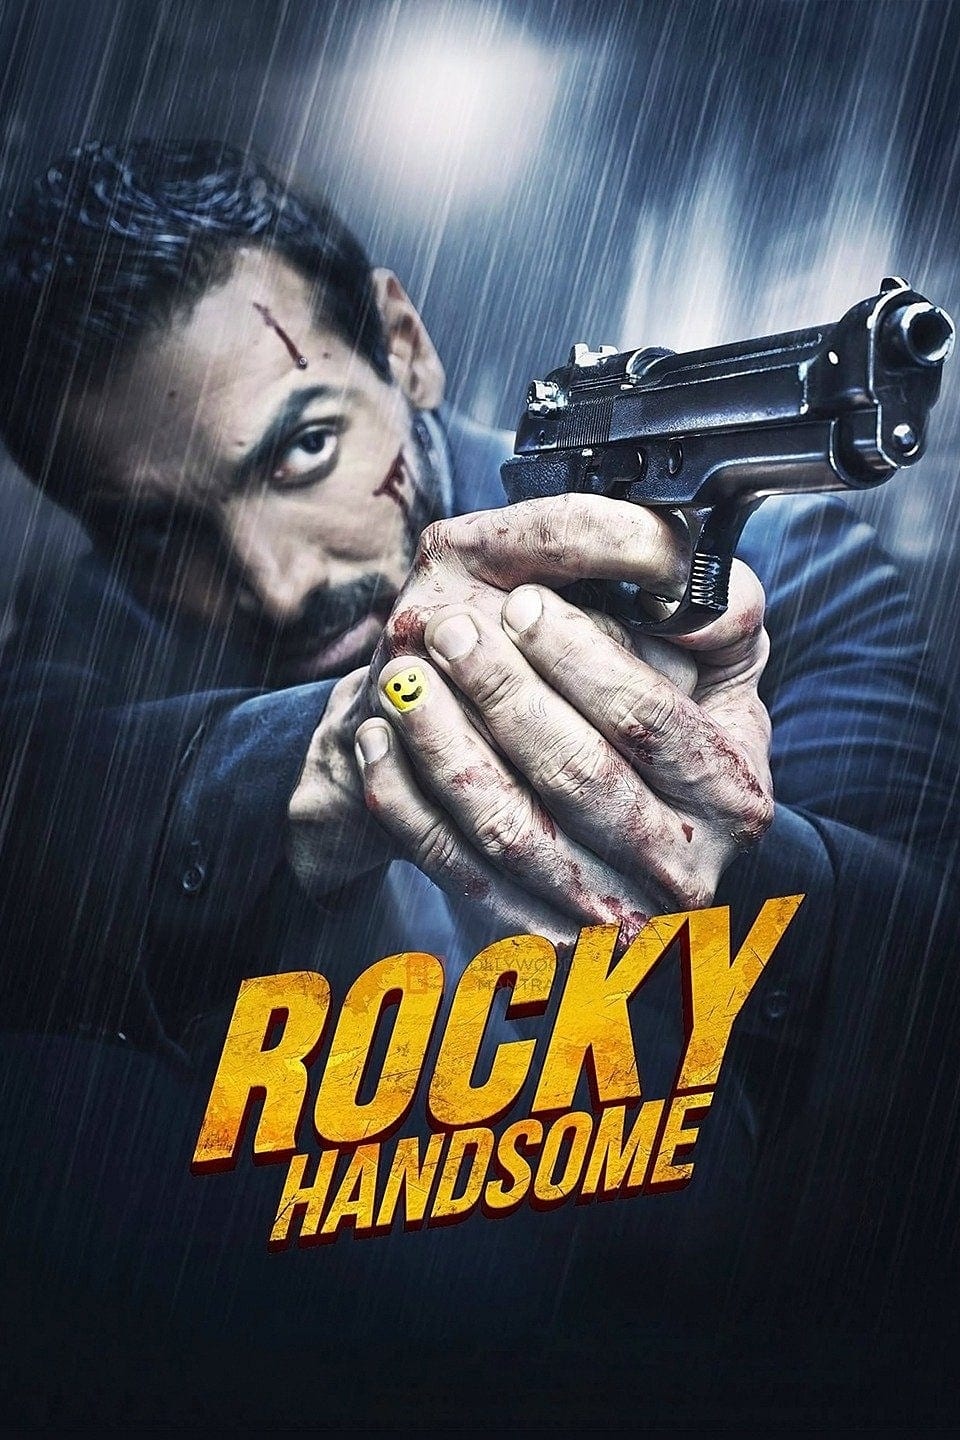 Poster for the movie "Rocky Handsome"